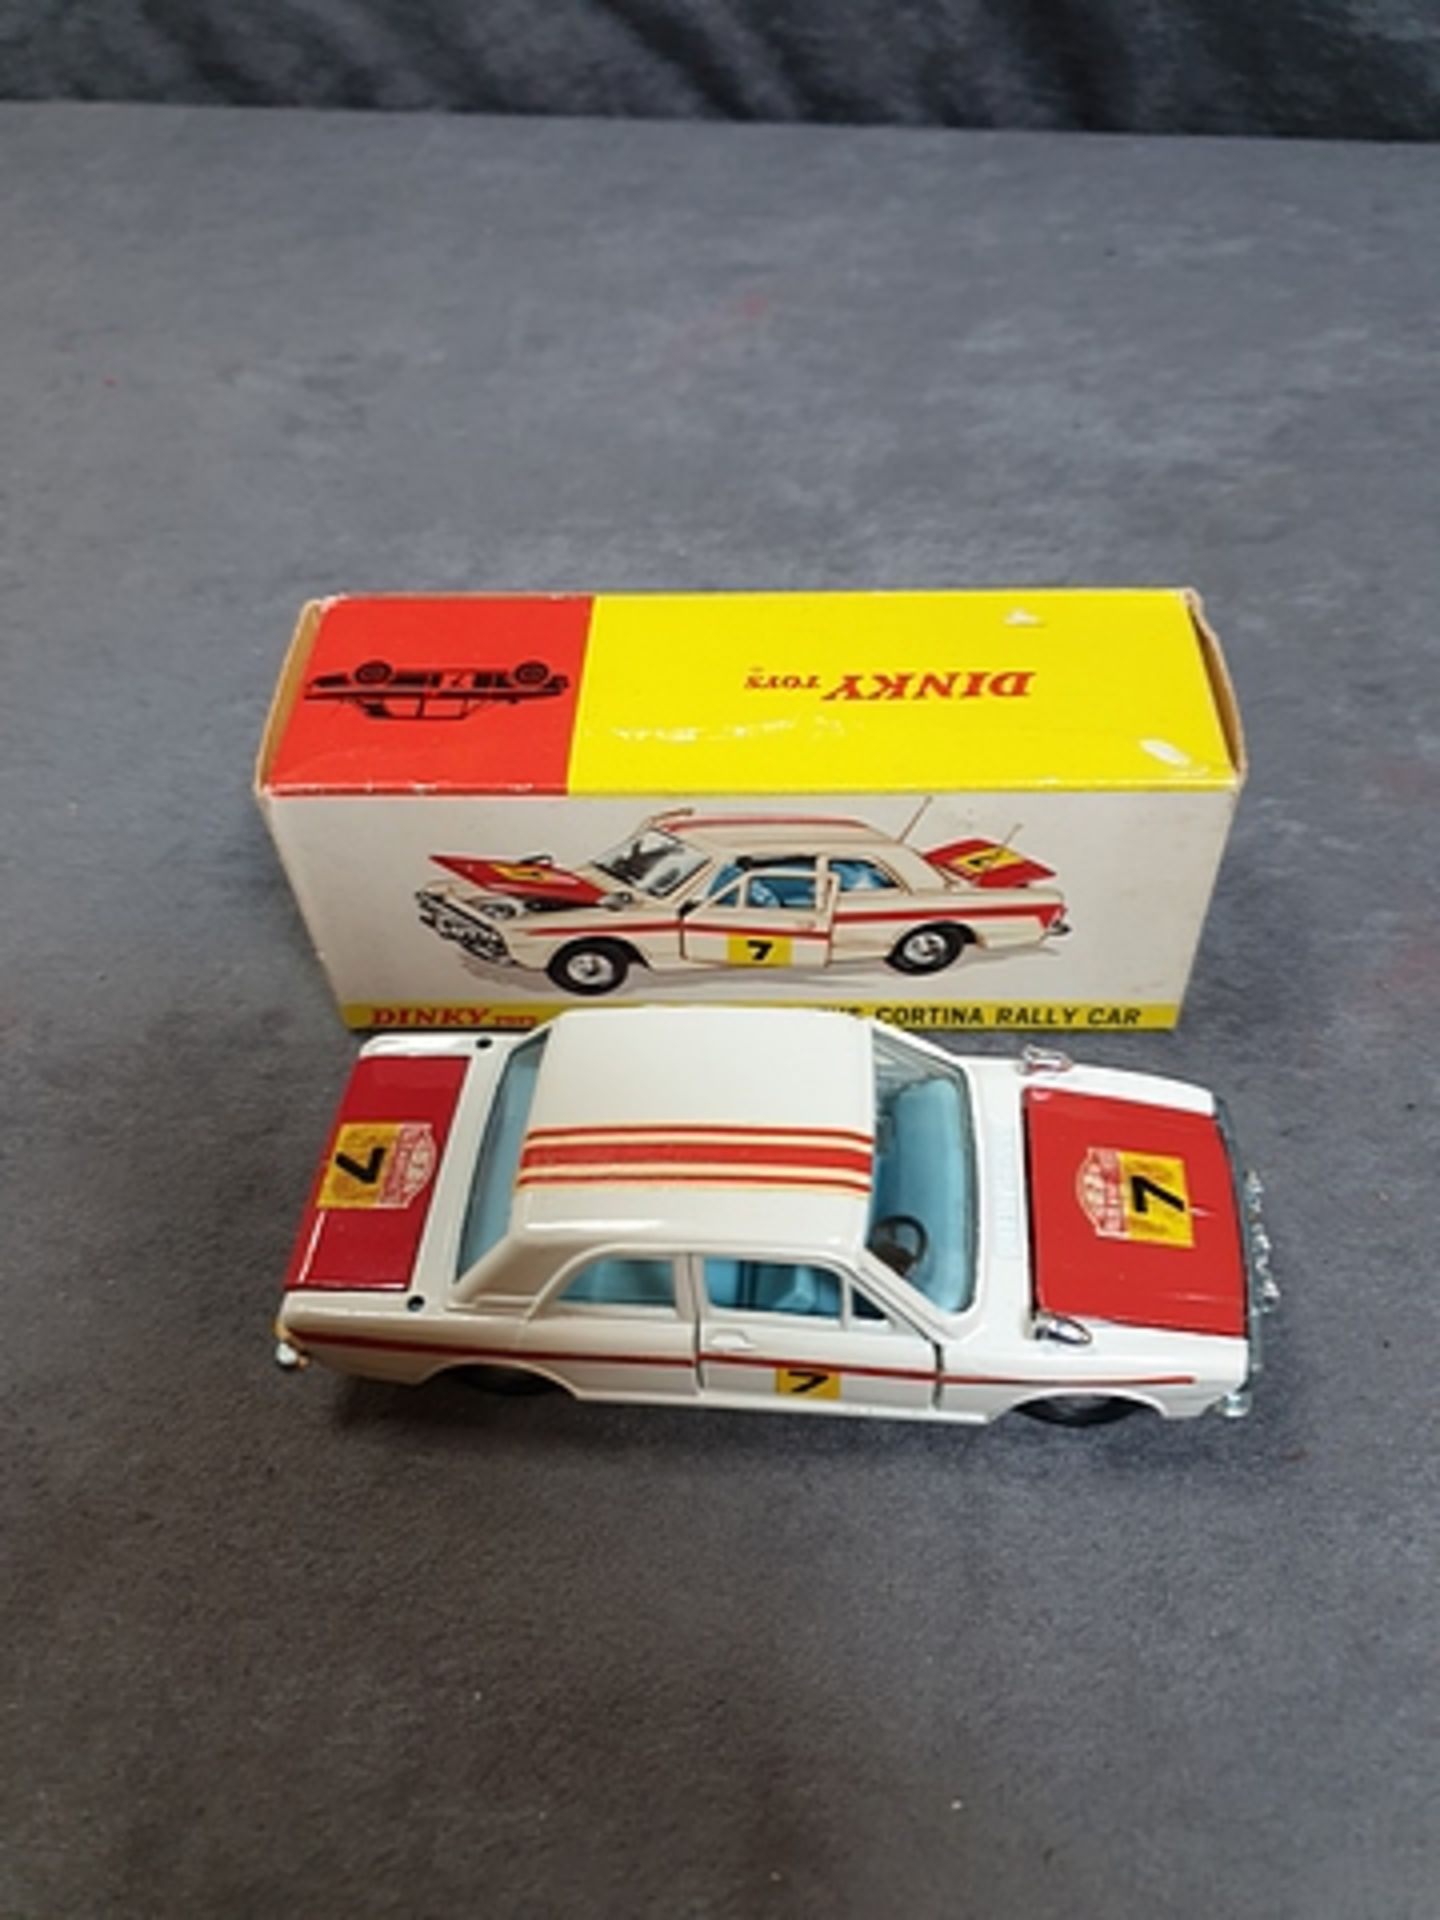 Dinky Diecast Toys #205 Lotus Cortina Rally Car model in Mint condition in a crisp Box - Image 2 of 3